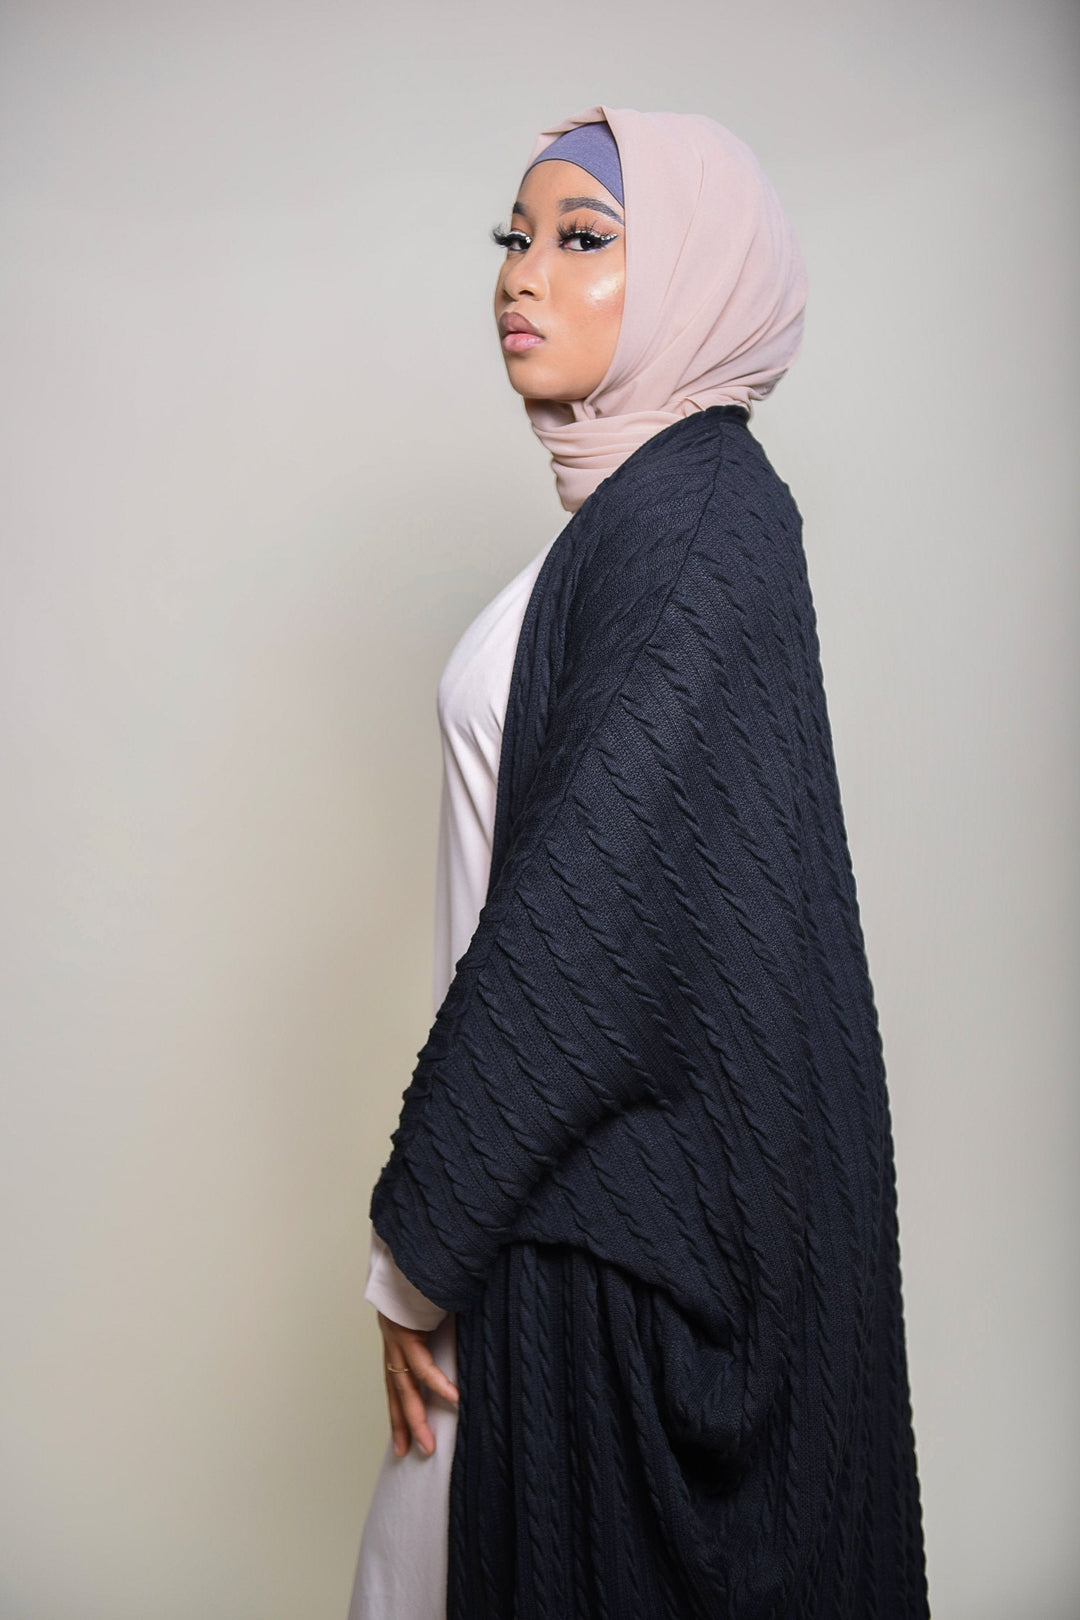 Get trendy with Sweater Duster - Black -  available at Voilee NY. Grab yours for $24.99 today!